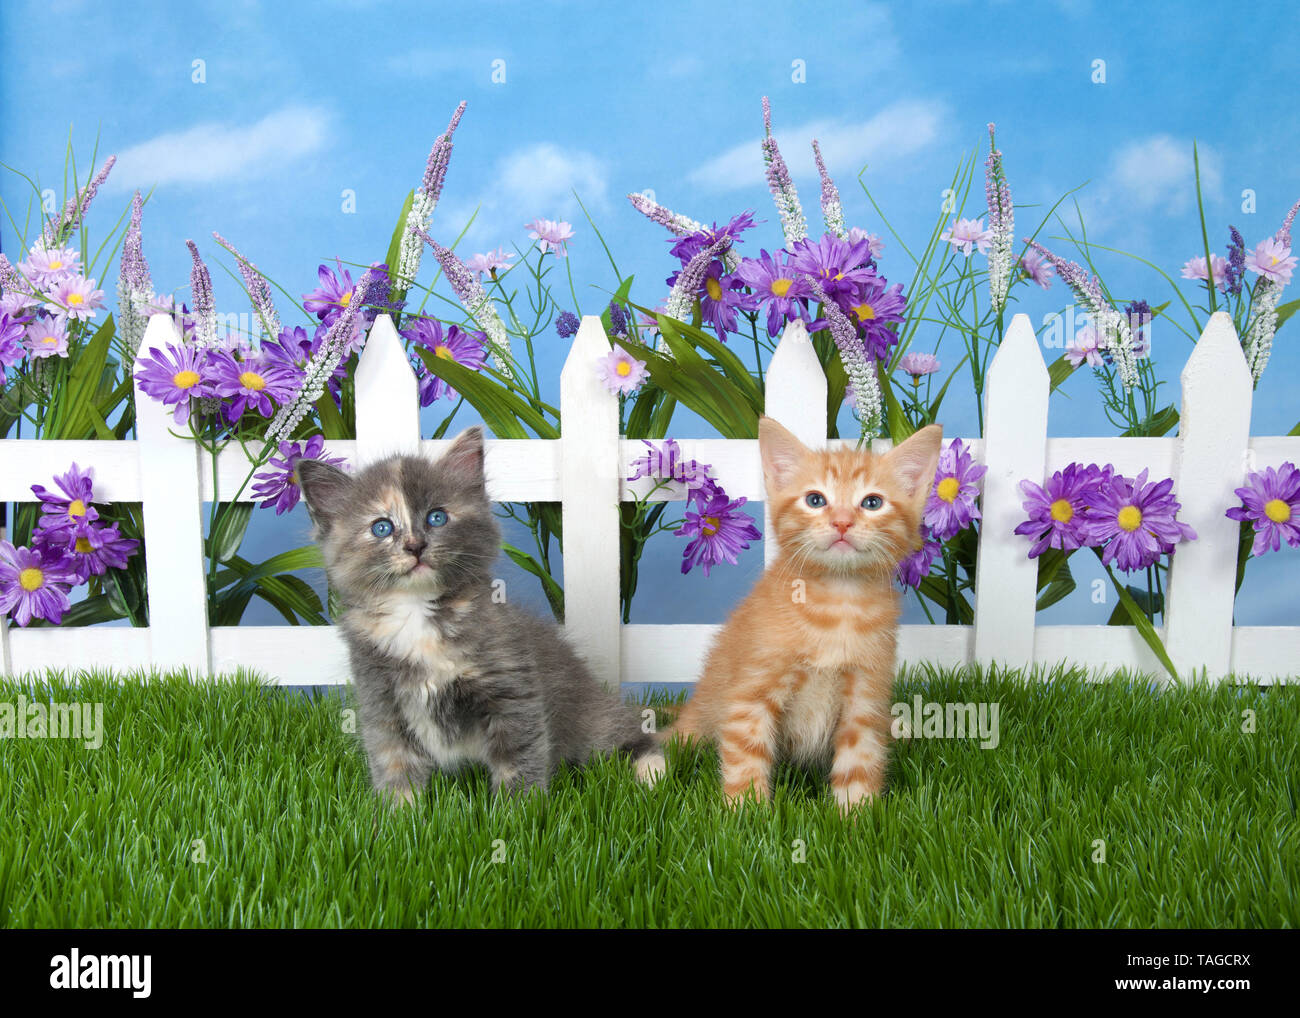 Two kittens sitting in green grass looking up, backyard in front of small white picket fence with purple flowers growing through, blue background sky  Stock Photo